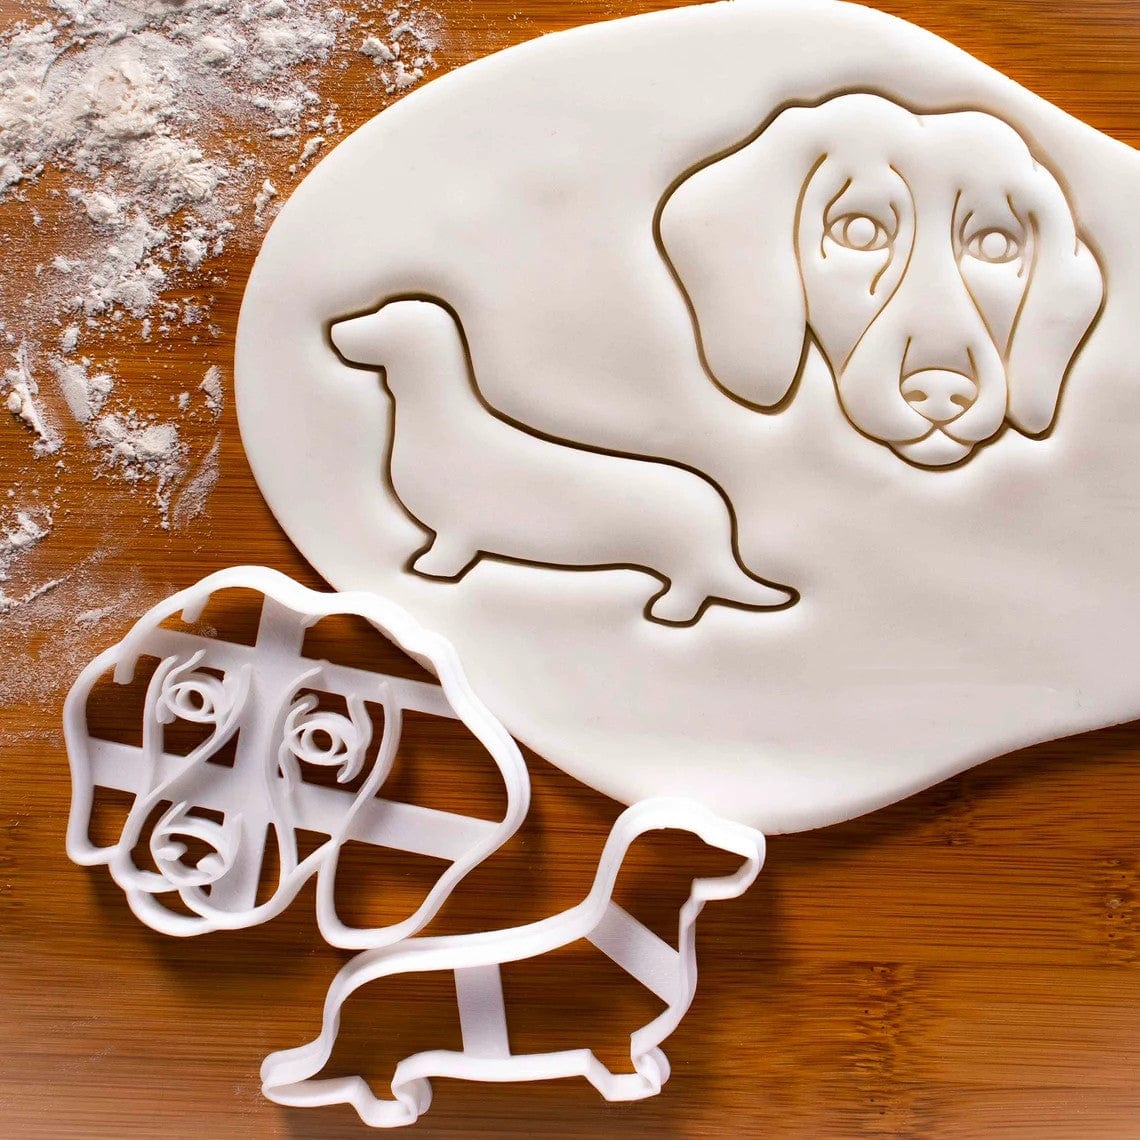 Dachshund Cookie Cutters Set ( Body & Head) The Doxie World